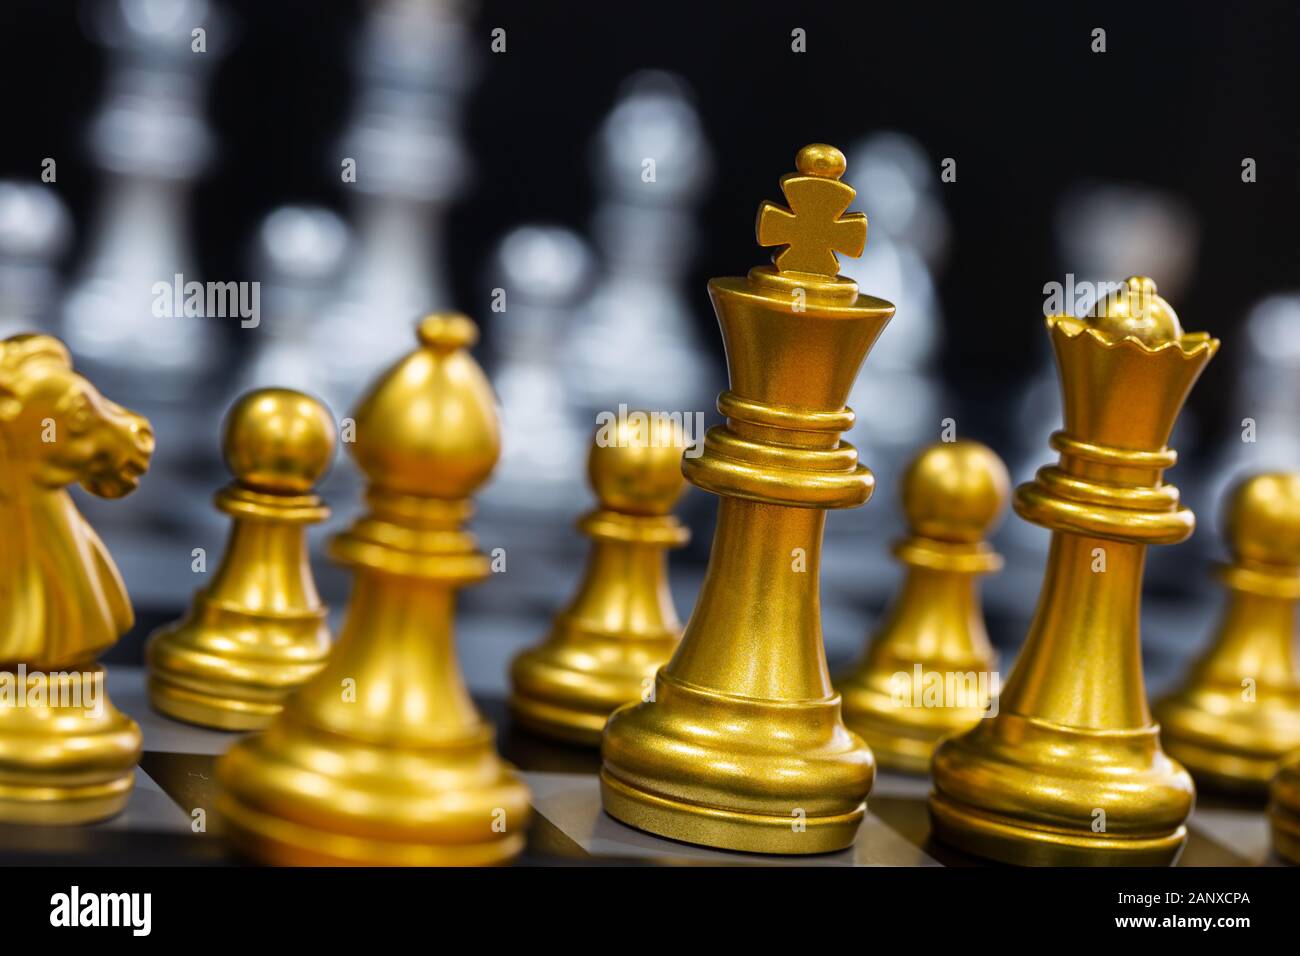 Chess: Game of Kings